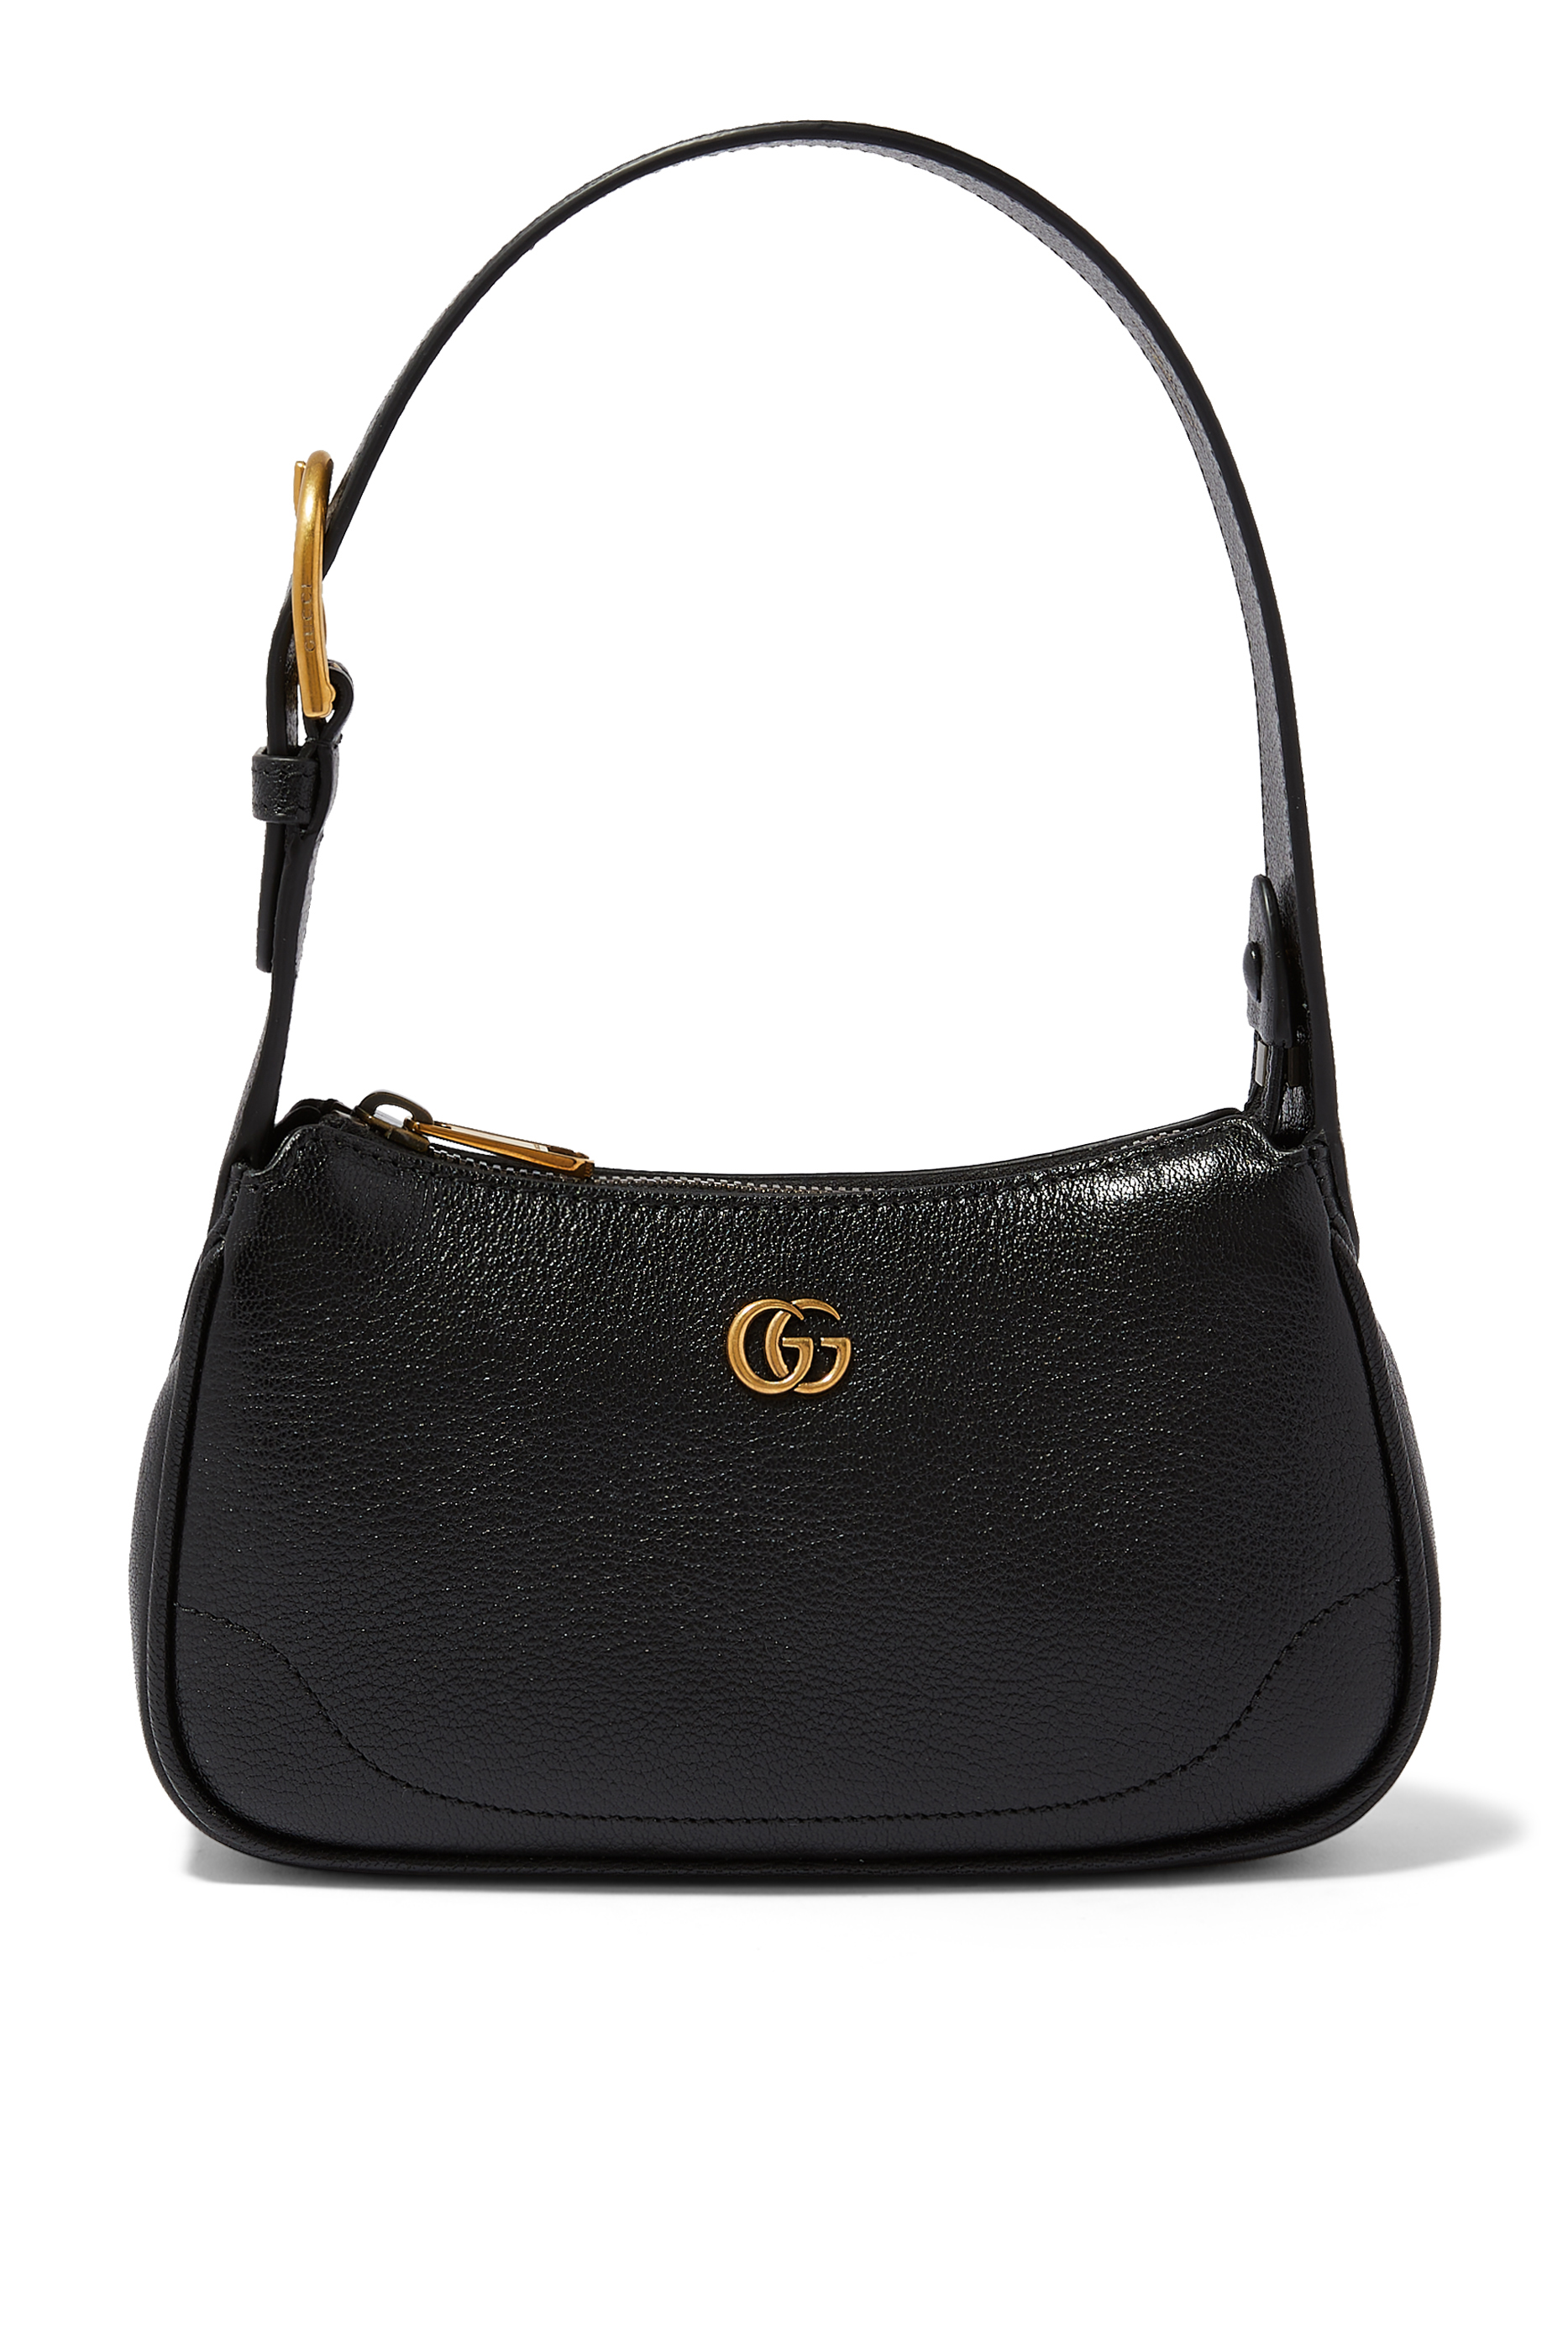 Shop Gucci Cross Body Bags for Men Collection Online in the Kuwait